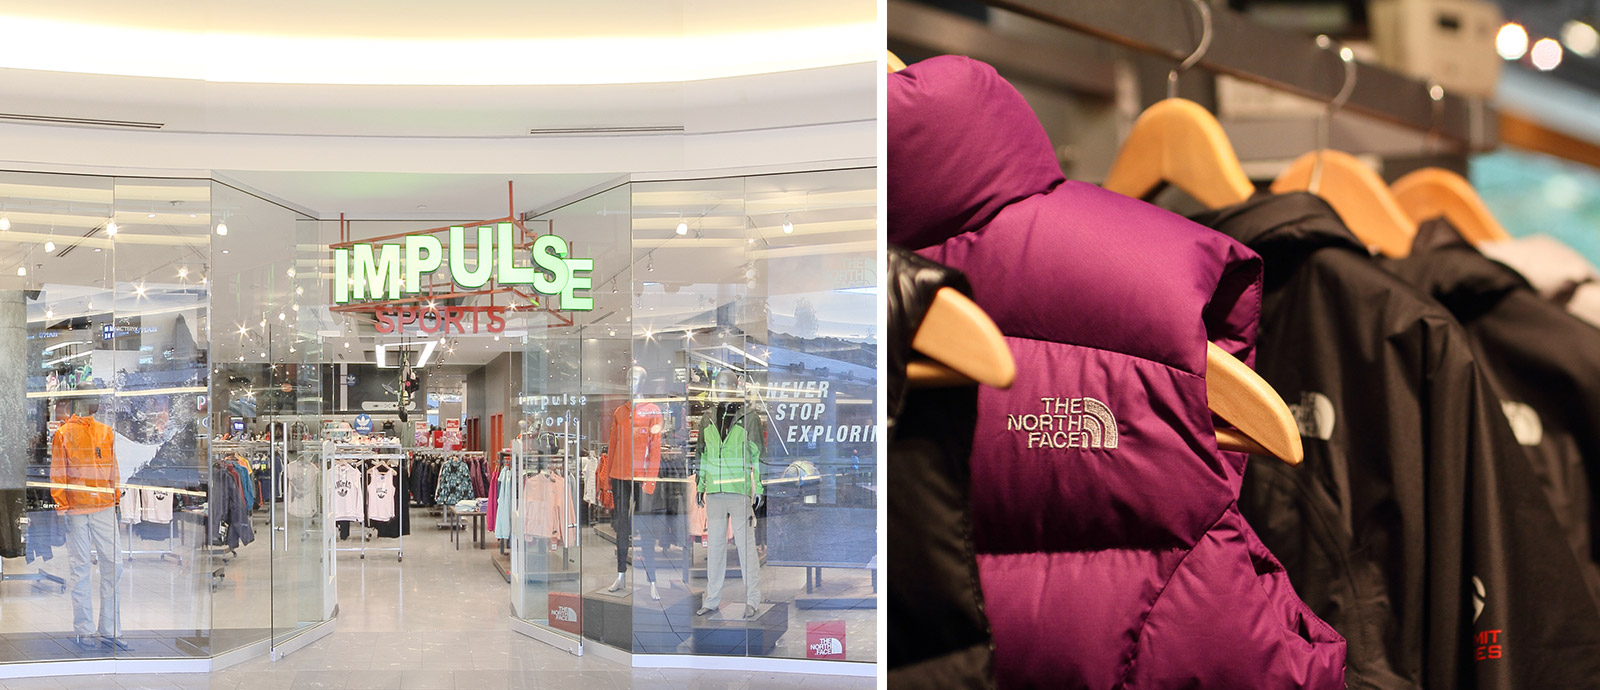 Fairchild Retail strategic expansion into the rocketing athleisure retail industry is marked by Impulse Sports, a clothing store that offers customers the best in sportswear brands including high-end names.